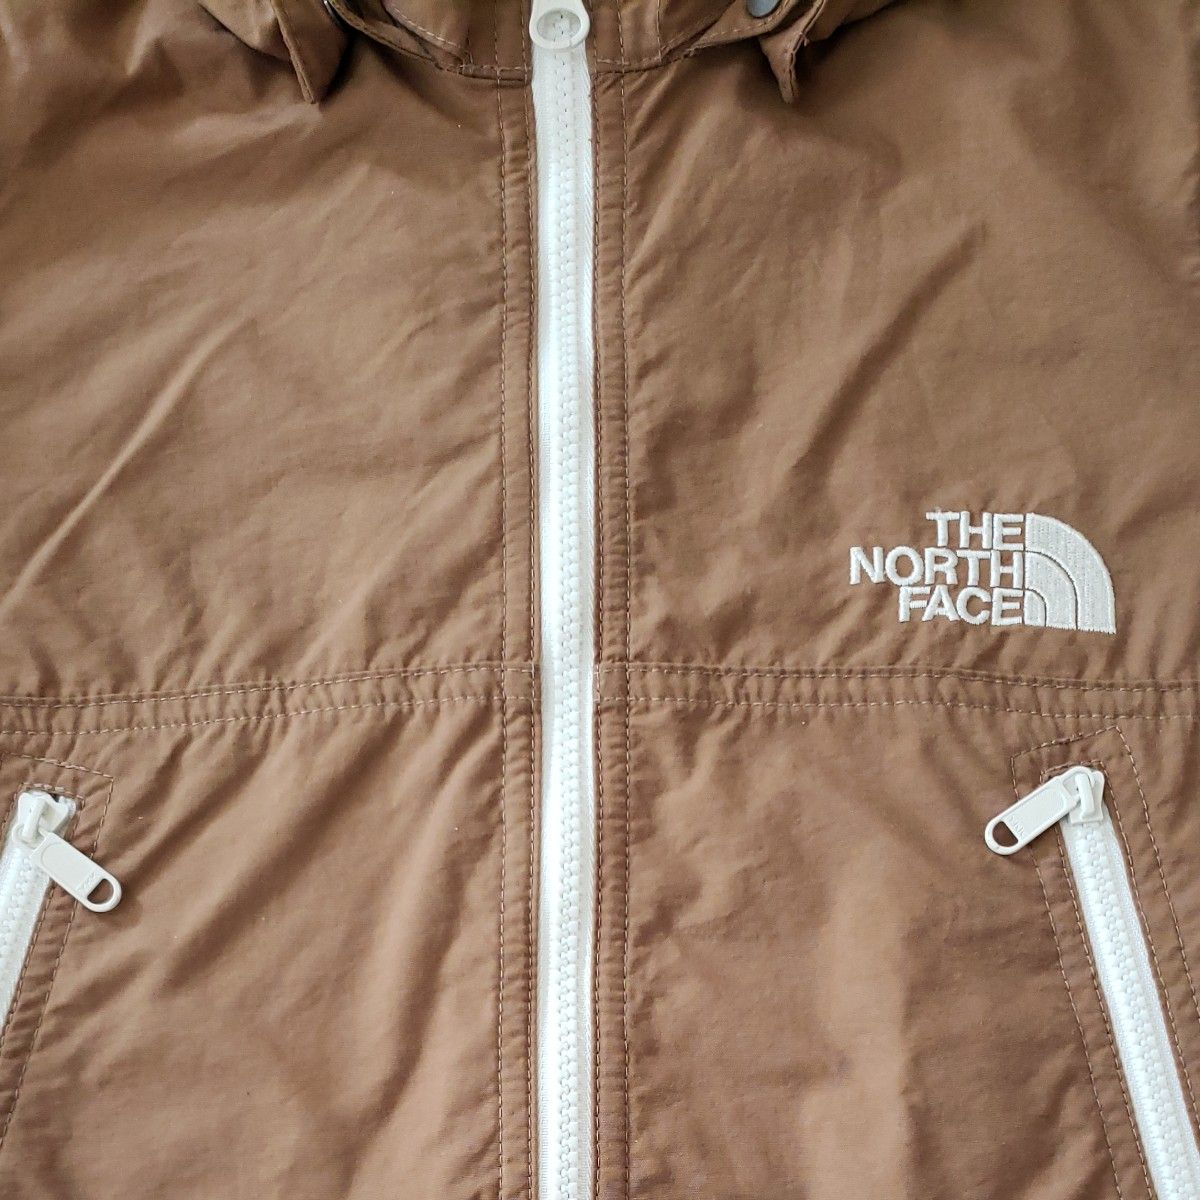 THE NORTH FACE キッズ コンパクトジャケット 80サイズ